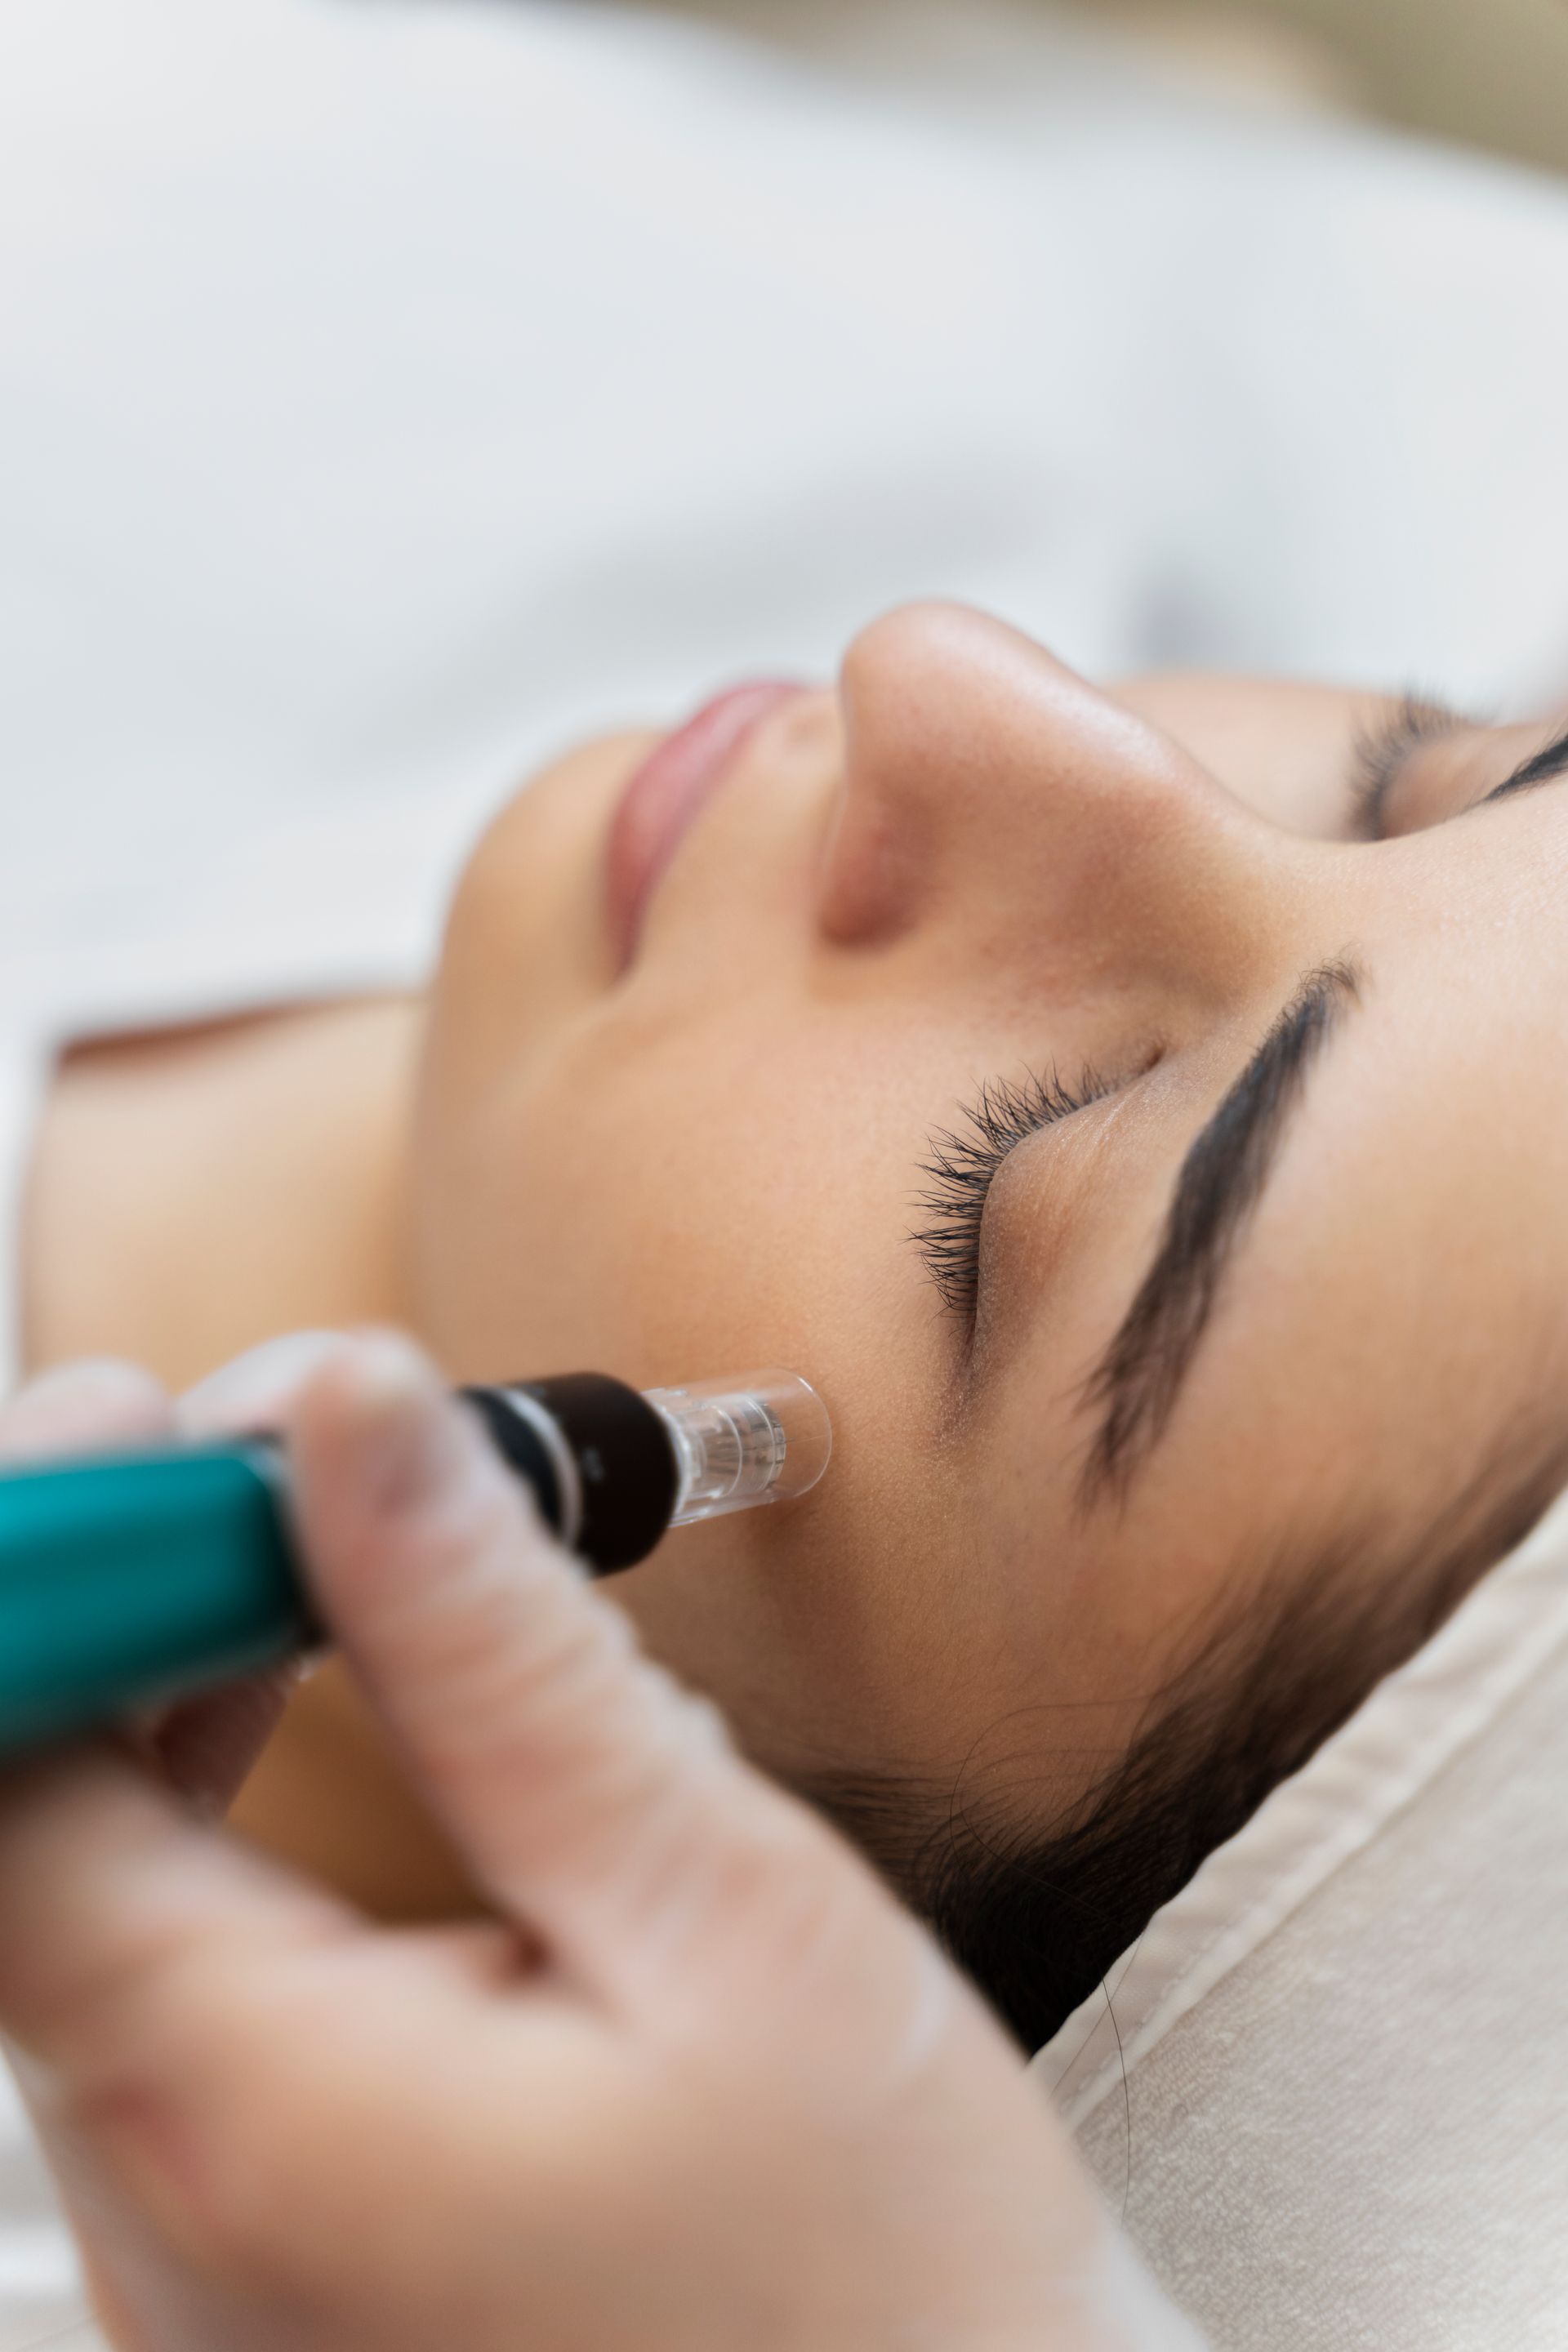 A woman is getting a microdermabrasion treatment on her face.